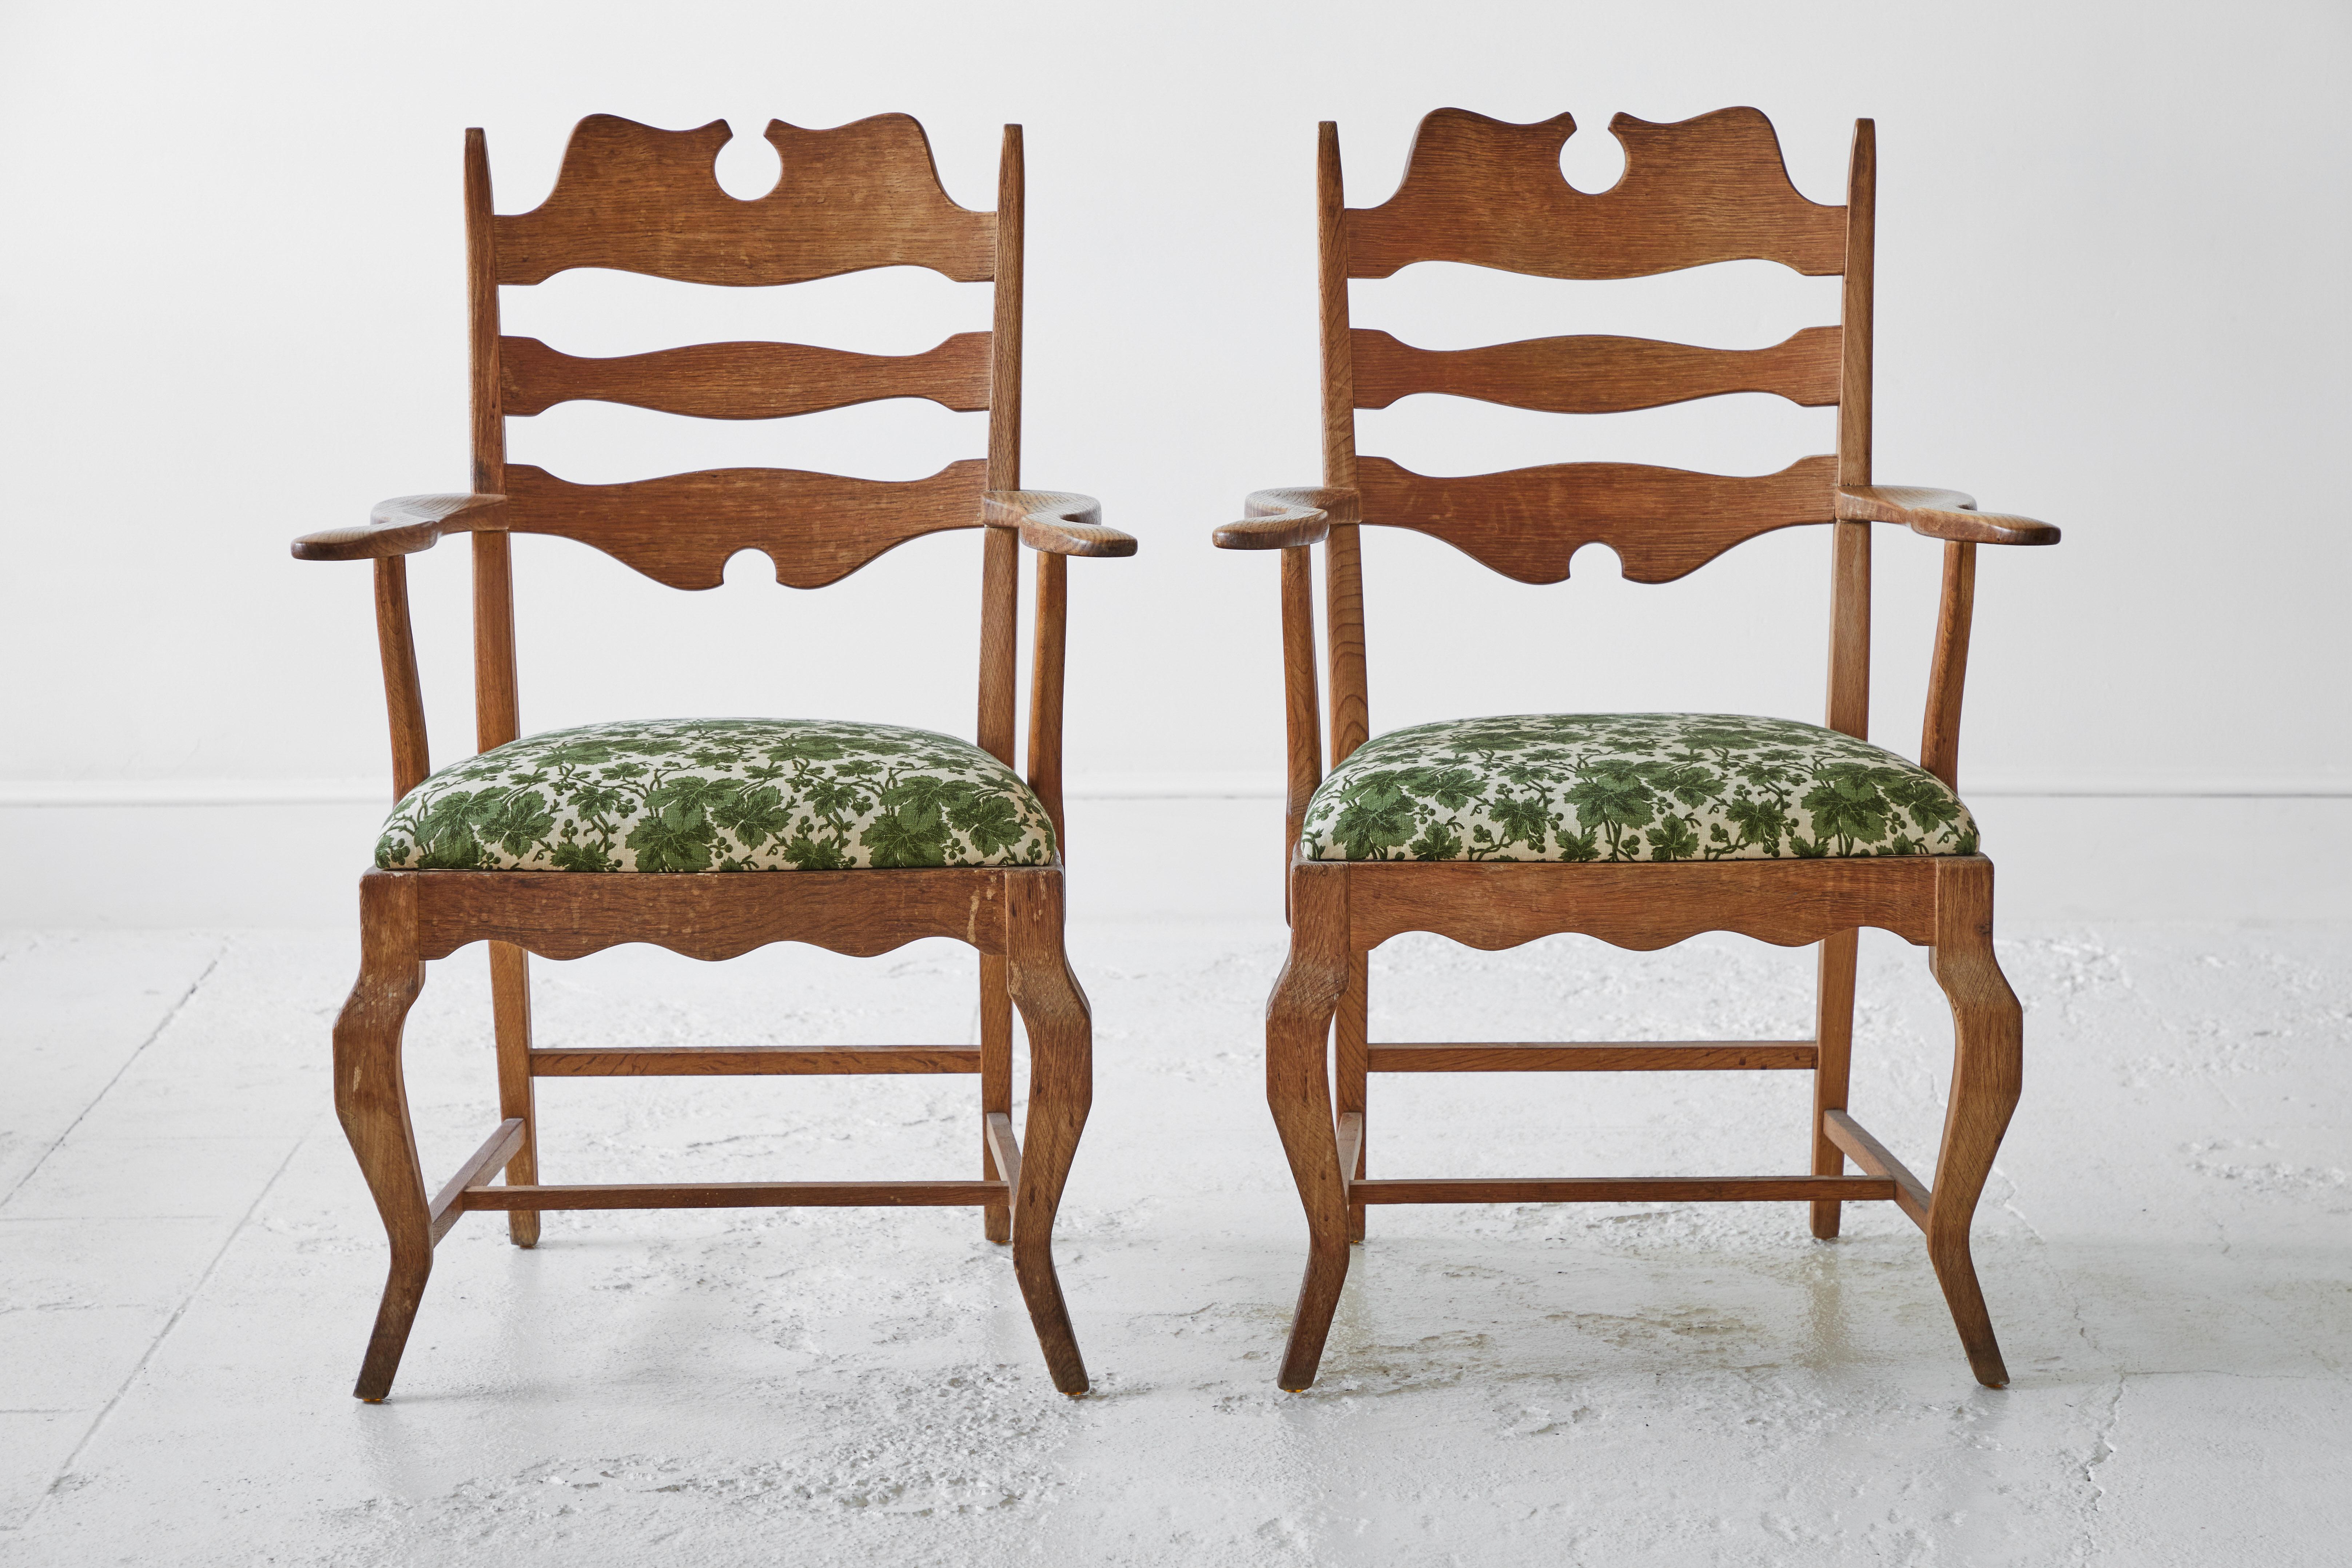 Stunning pair of armchairs by Henning Kjærnulf for Nyrup Moebelfabrik, Denmark, 1960s. The iconic “razor blade” shaped back rest give these chairs an unusual but striking appearance. The chairs provide a surprisingly comfortable seat due to its